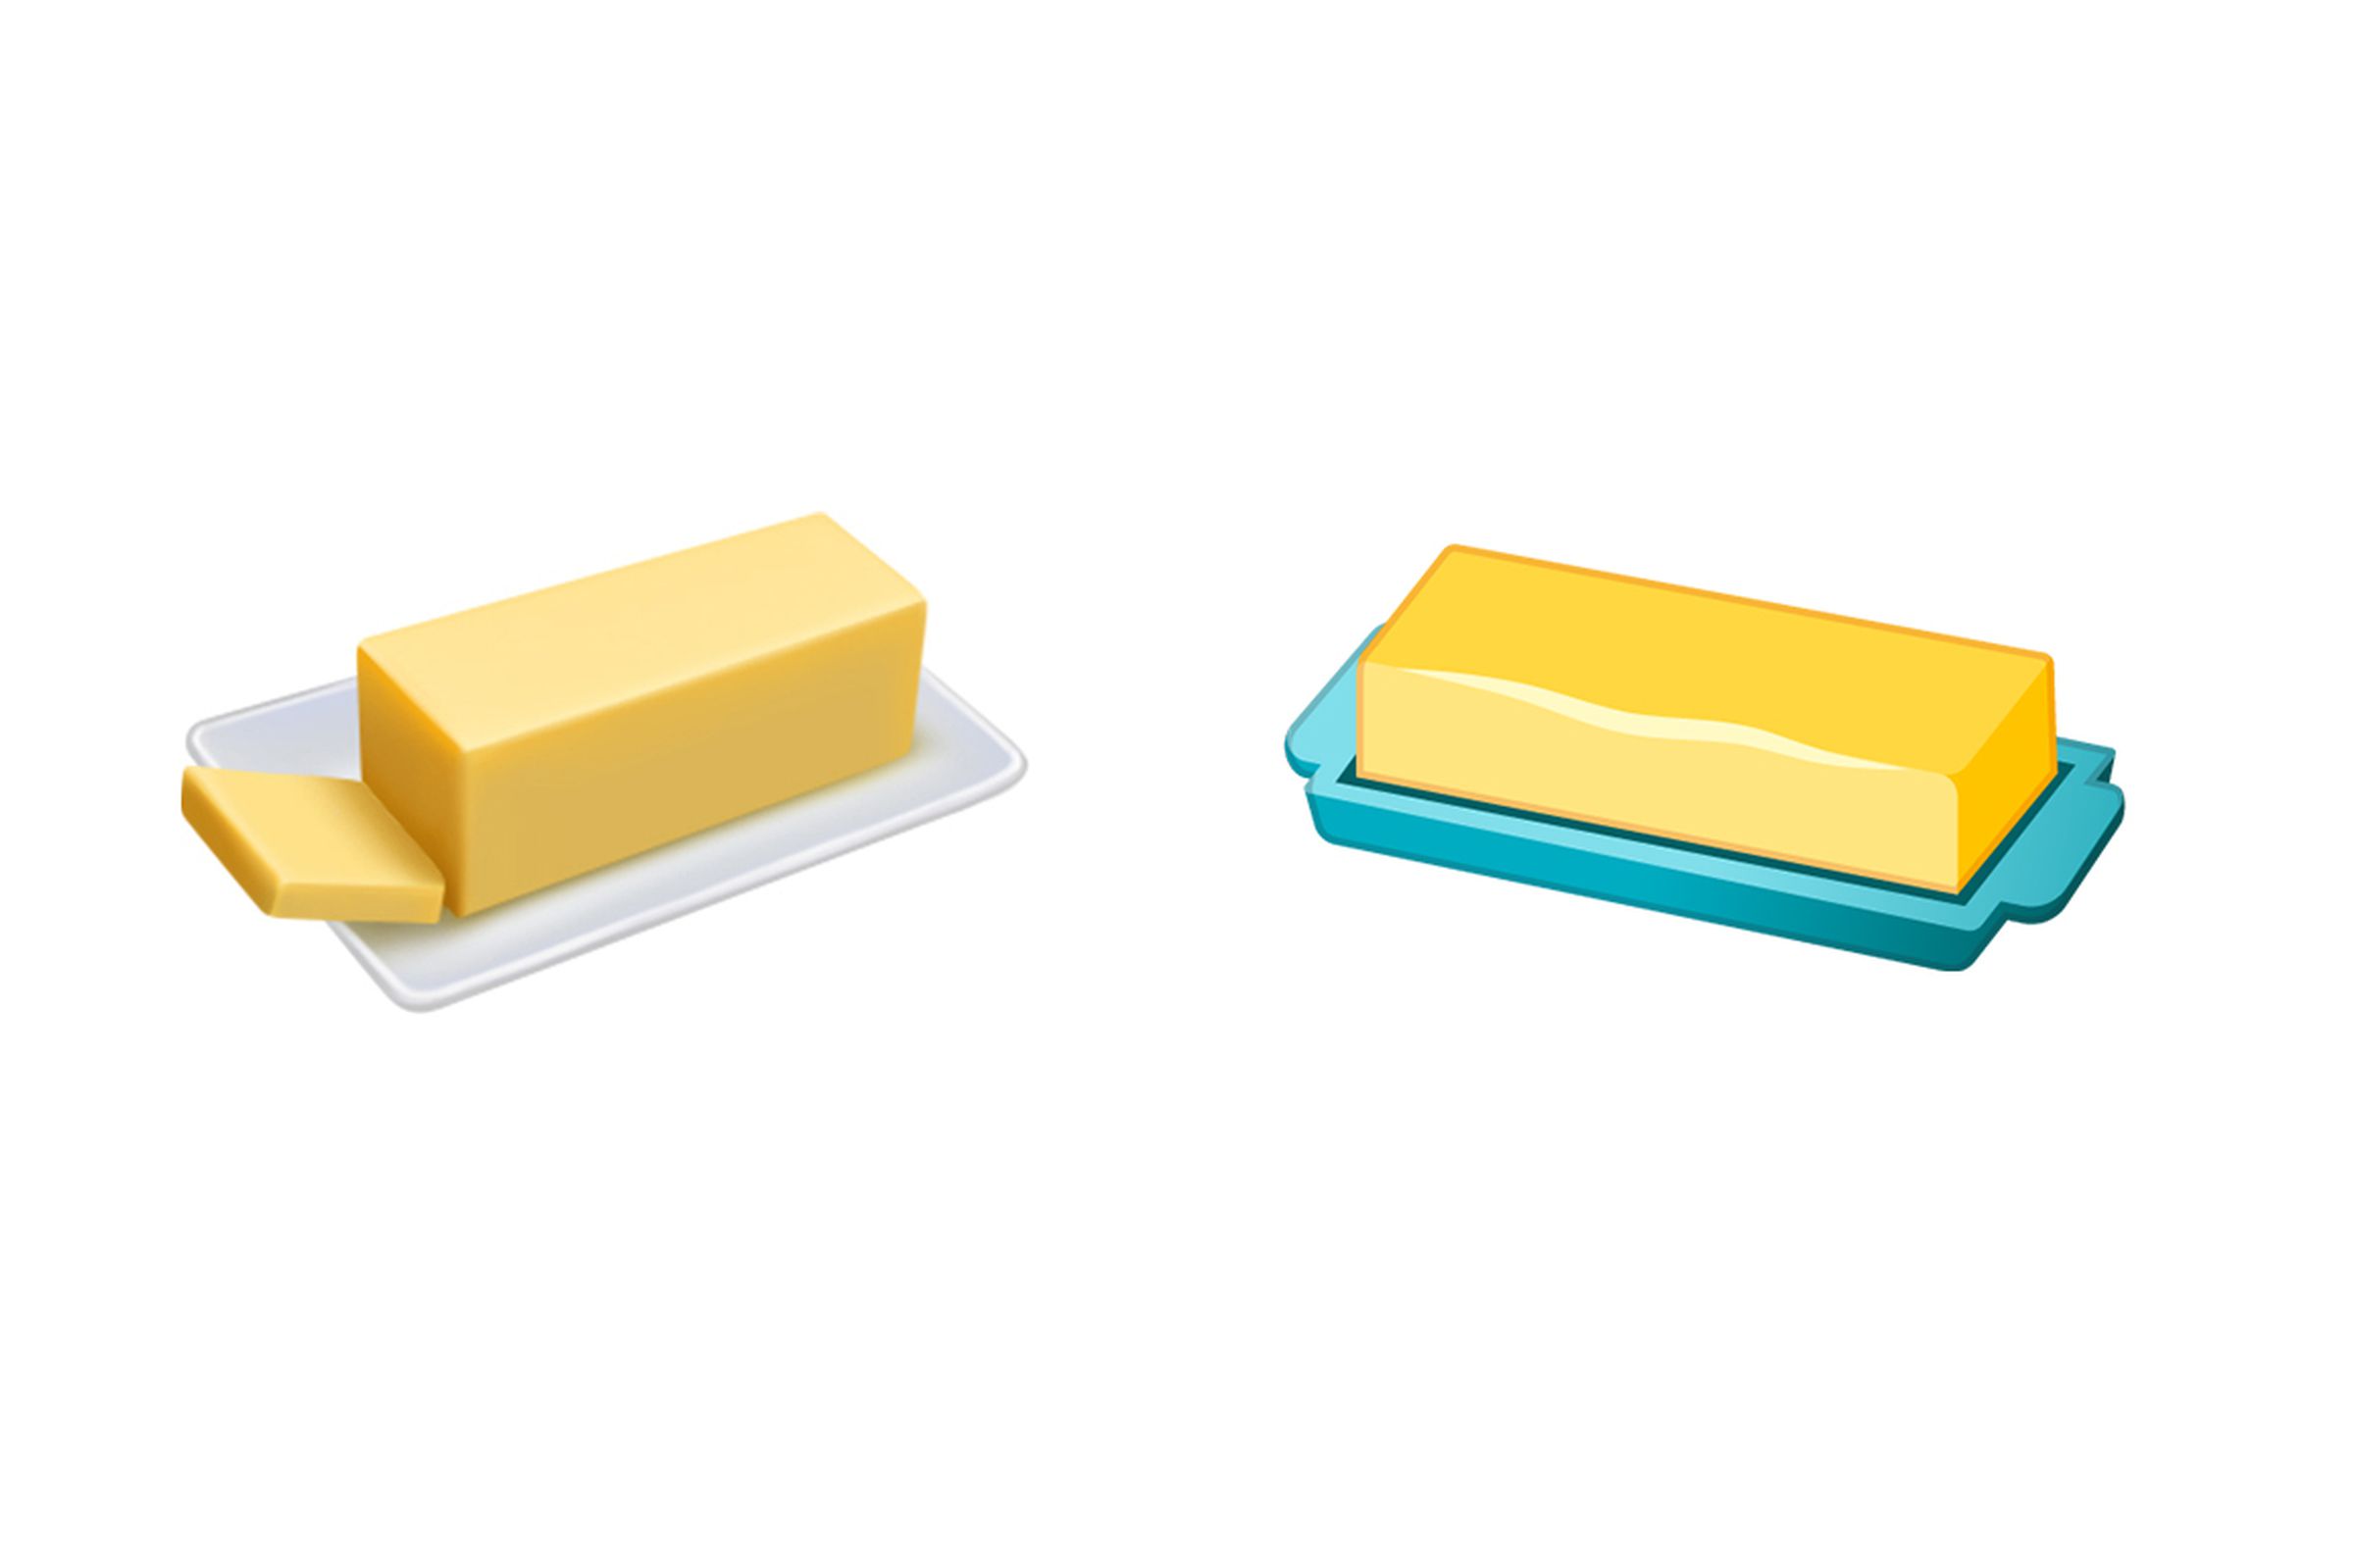 Apple’s butter (left) looks delicious, Google’s (right) just looks like butter.